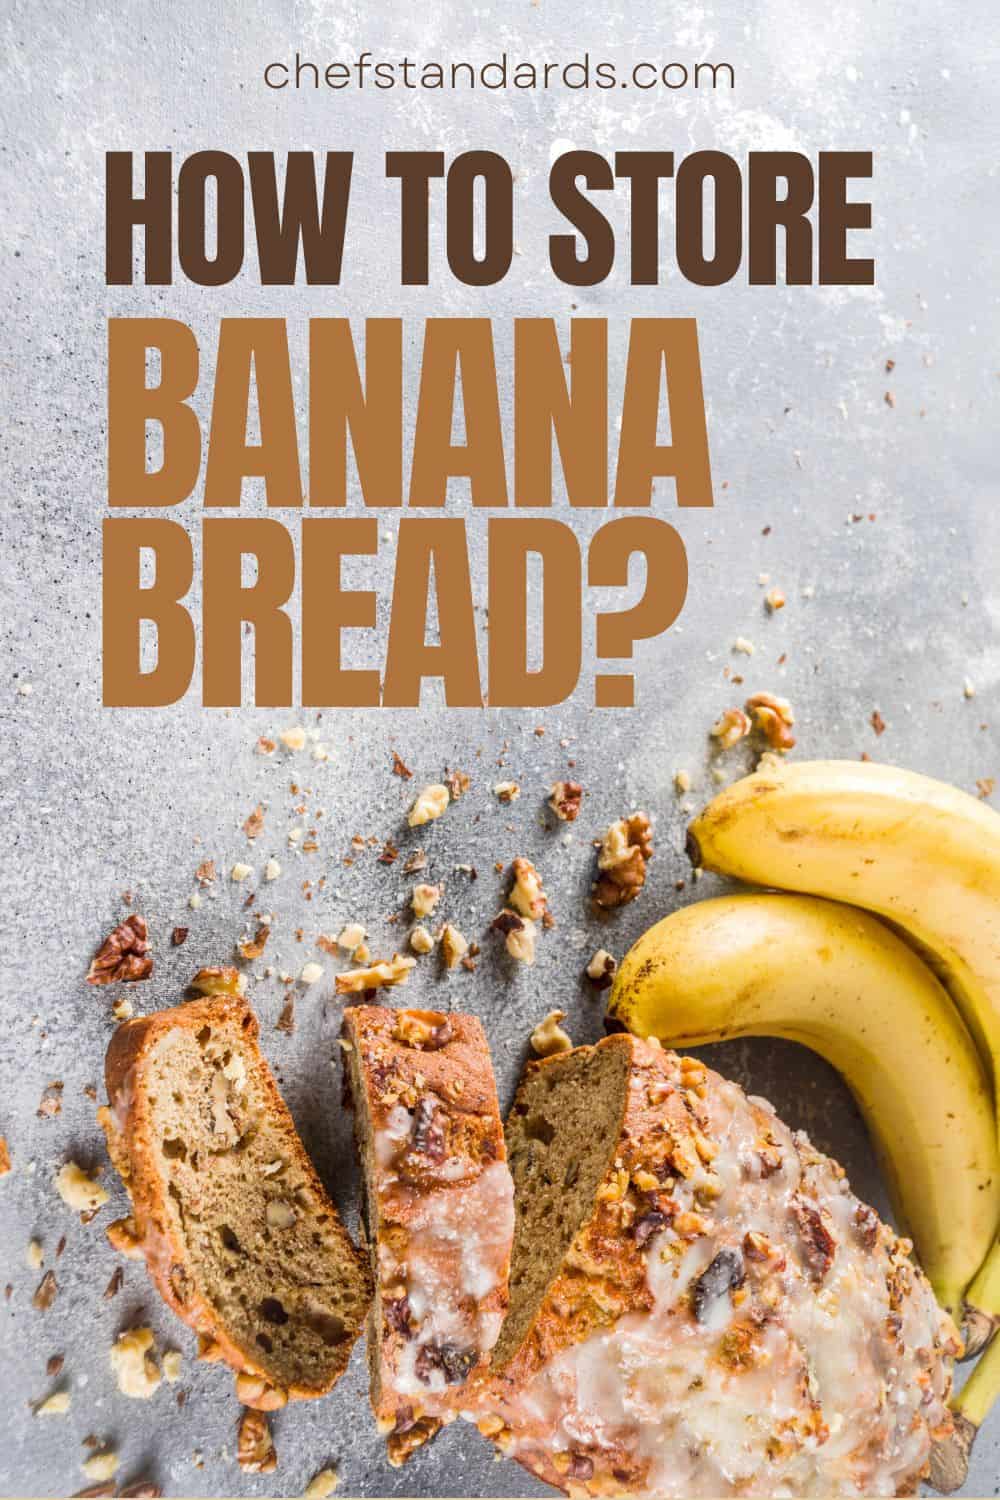 How To Store Banana Bread So That It Stays Fresh For Longer
